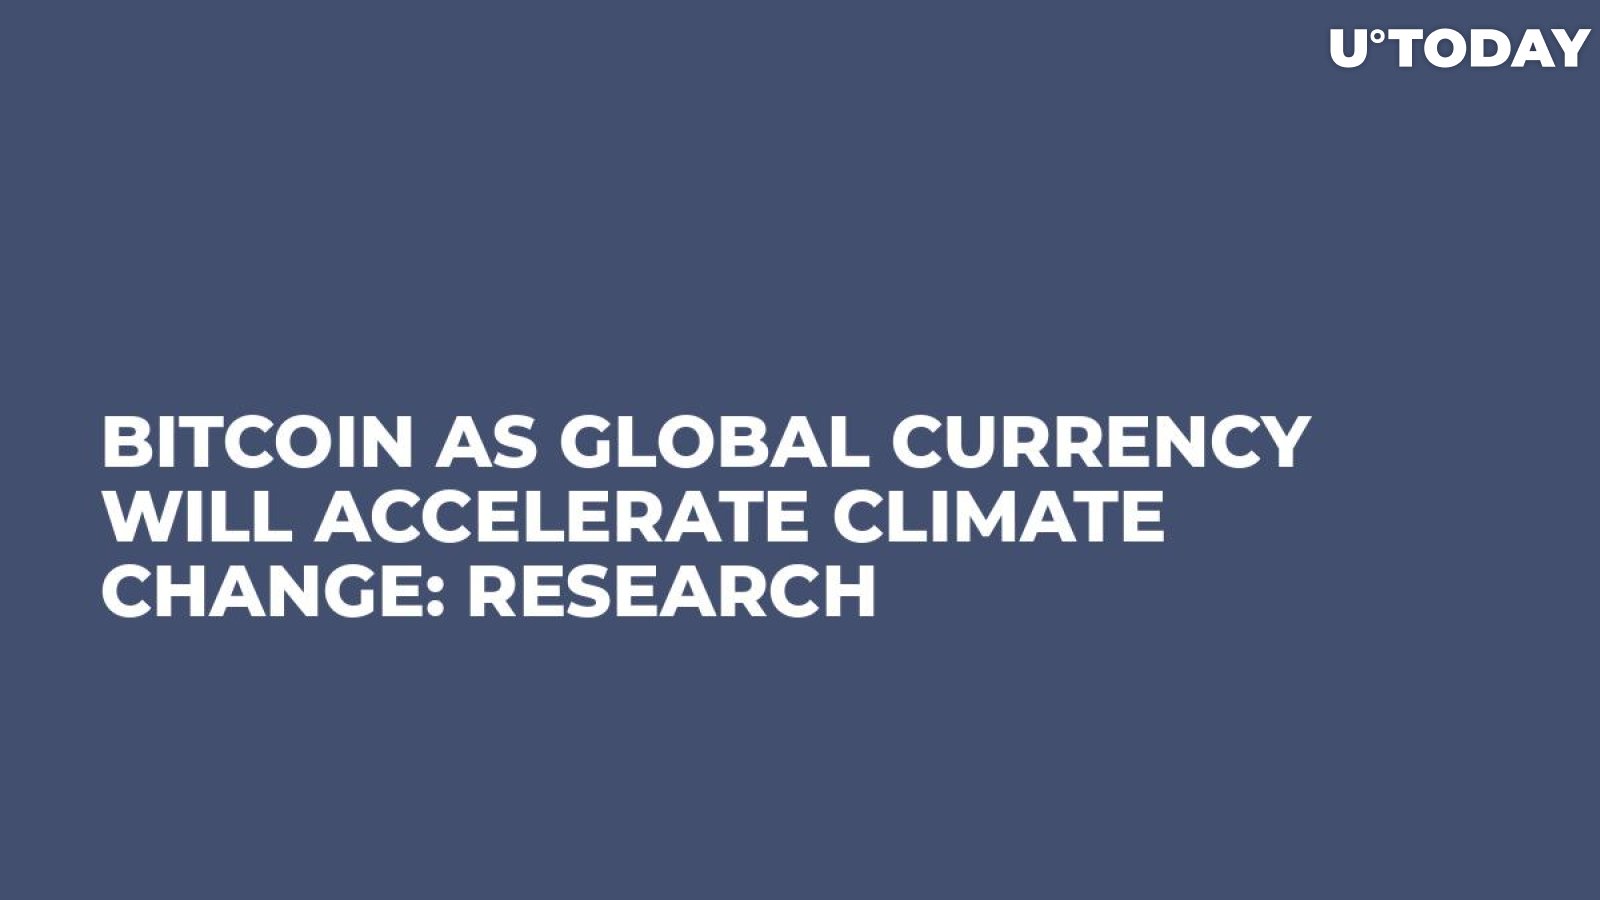 Bitcoin as Global Currency Will Accelerate Climate Change: Research